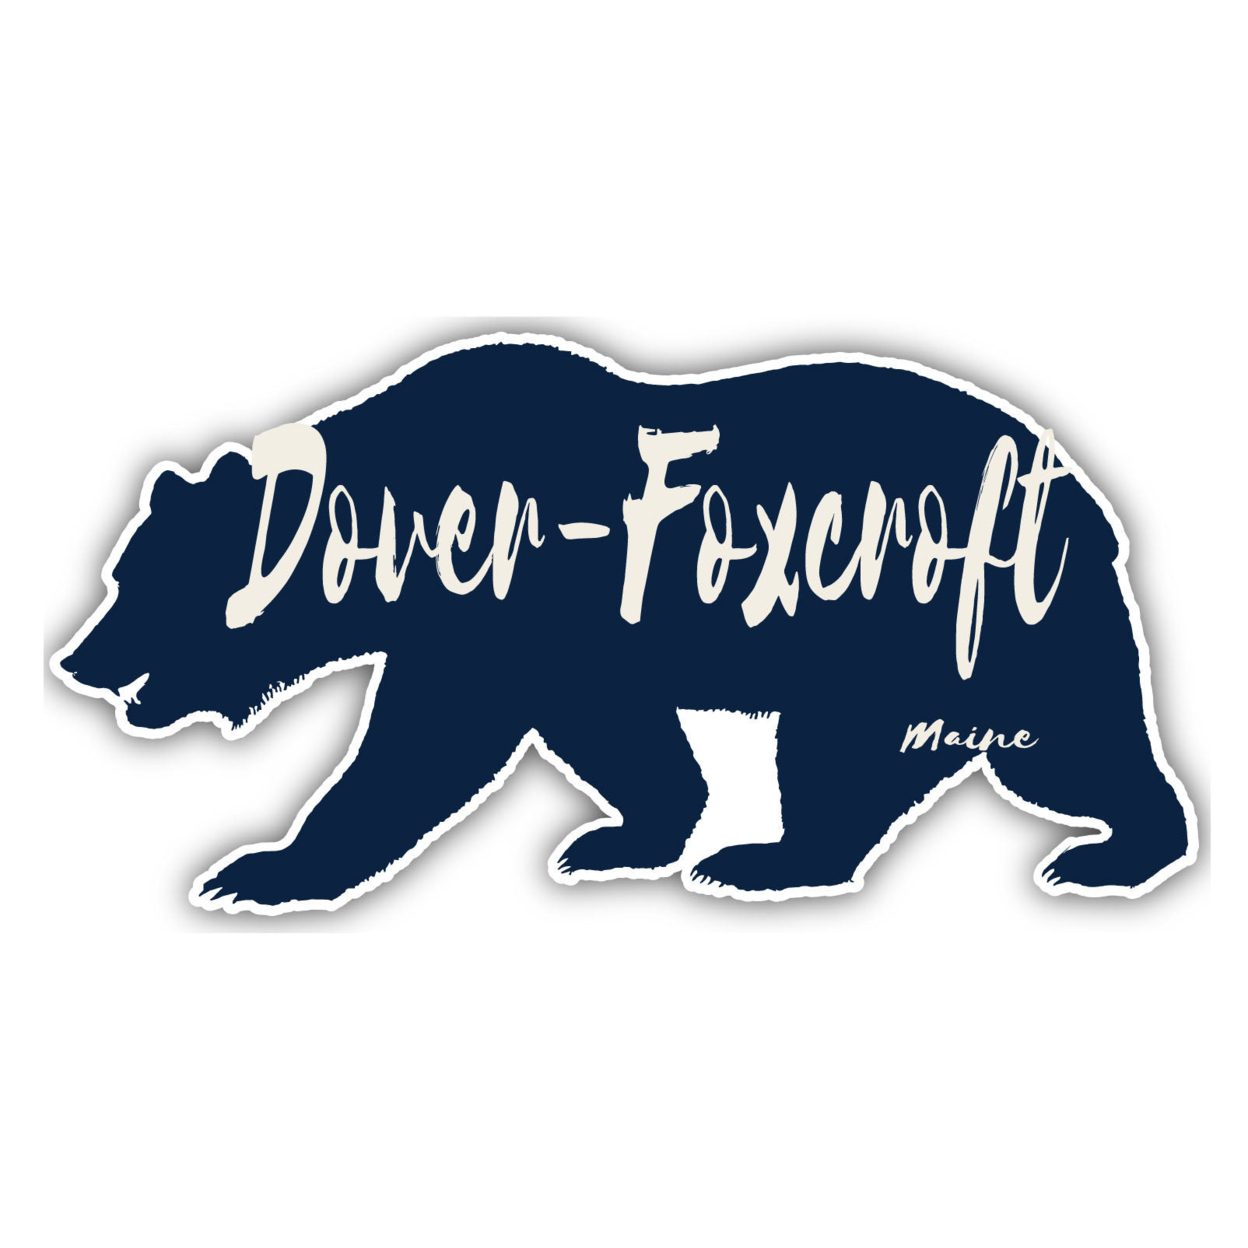 Dover-Foxcroft Maine Souvenir Decorative Stickers (Choose Theme And Size) - 4-Pack, 10-Inch, Bear